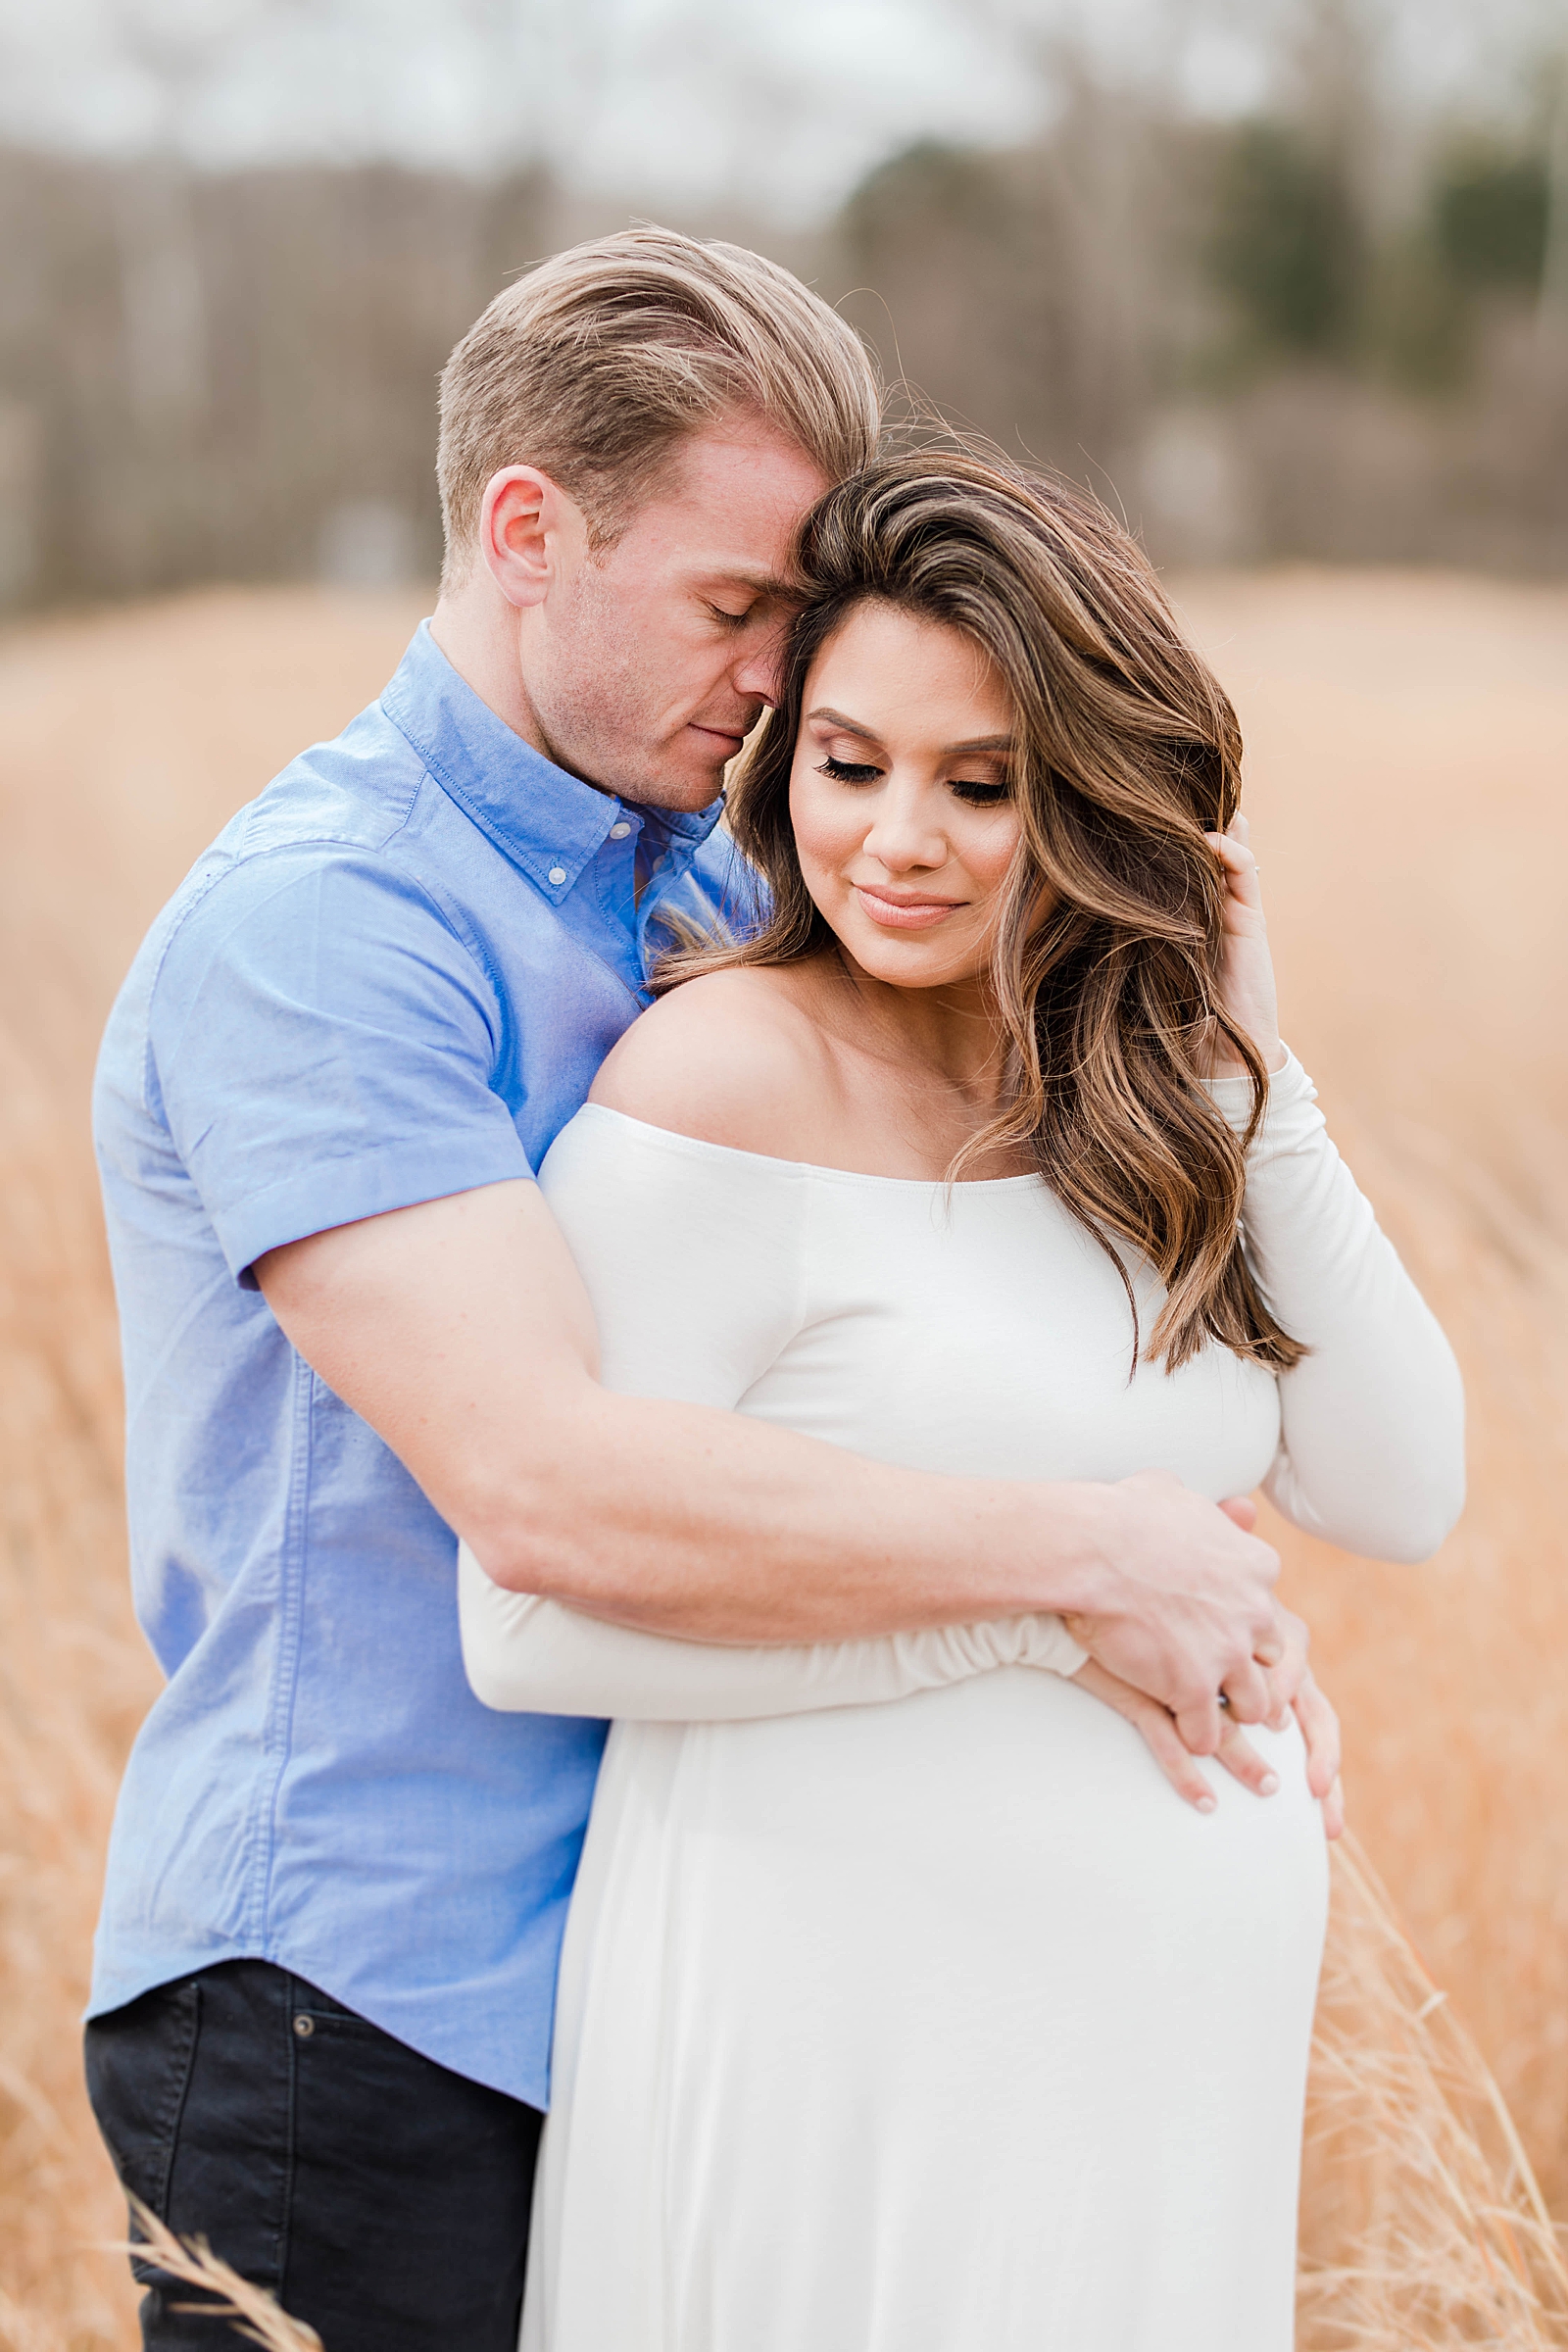 White Maternity Dress in Fields in Southern Maryland by Costola Photography